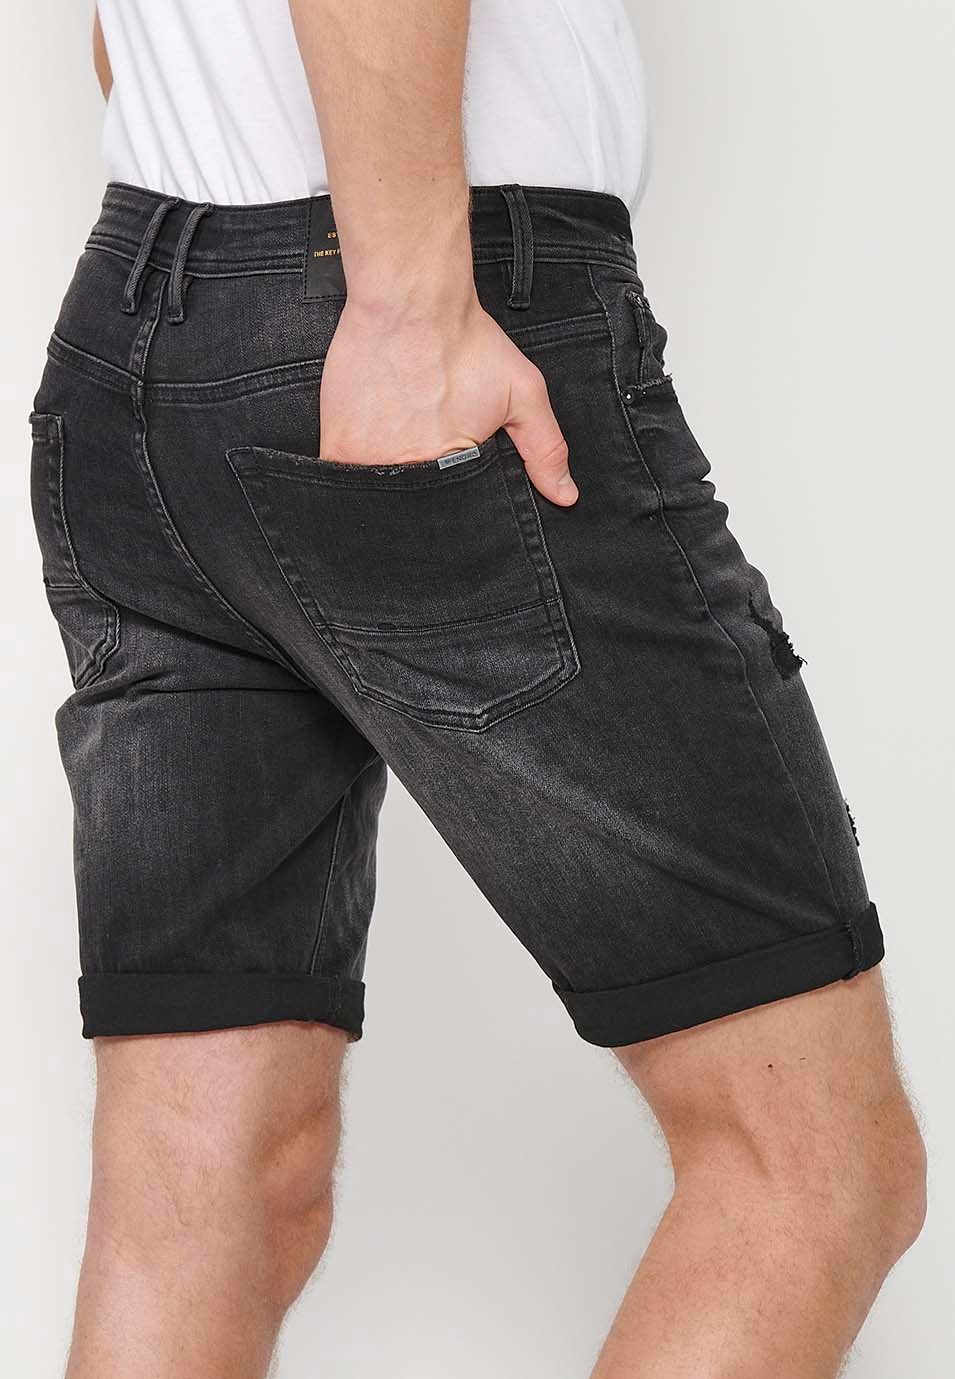 Black Denim Bermuda Shorts with Turn-Up Finish and Front Zipper and Button Closure for Men 1